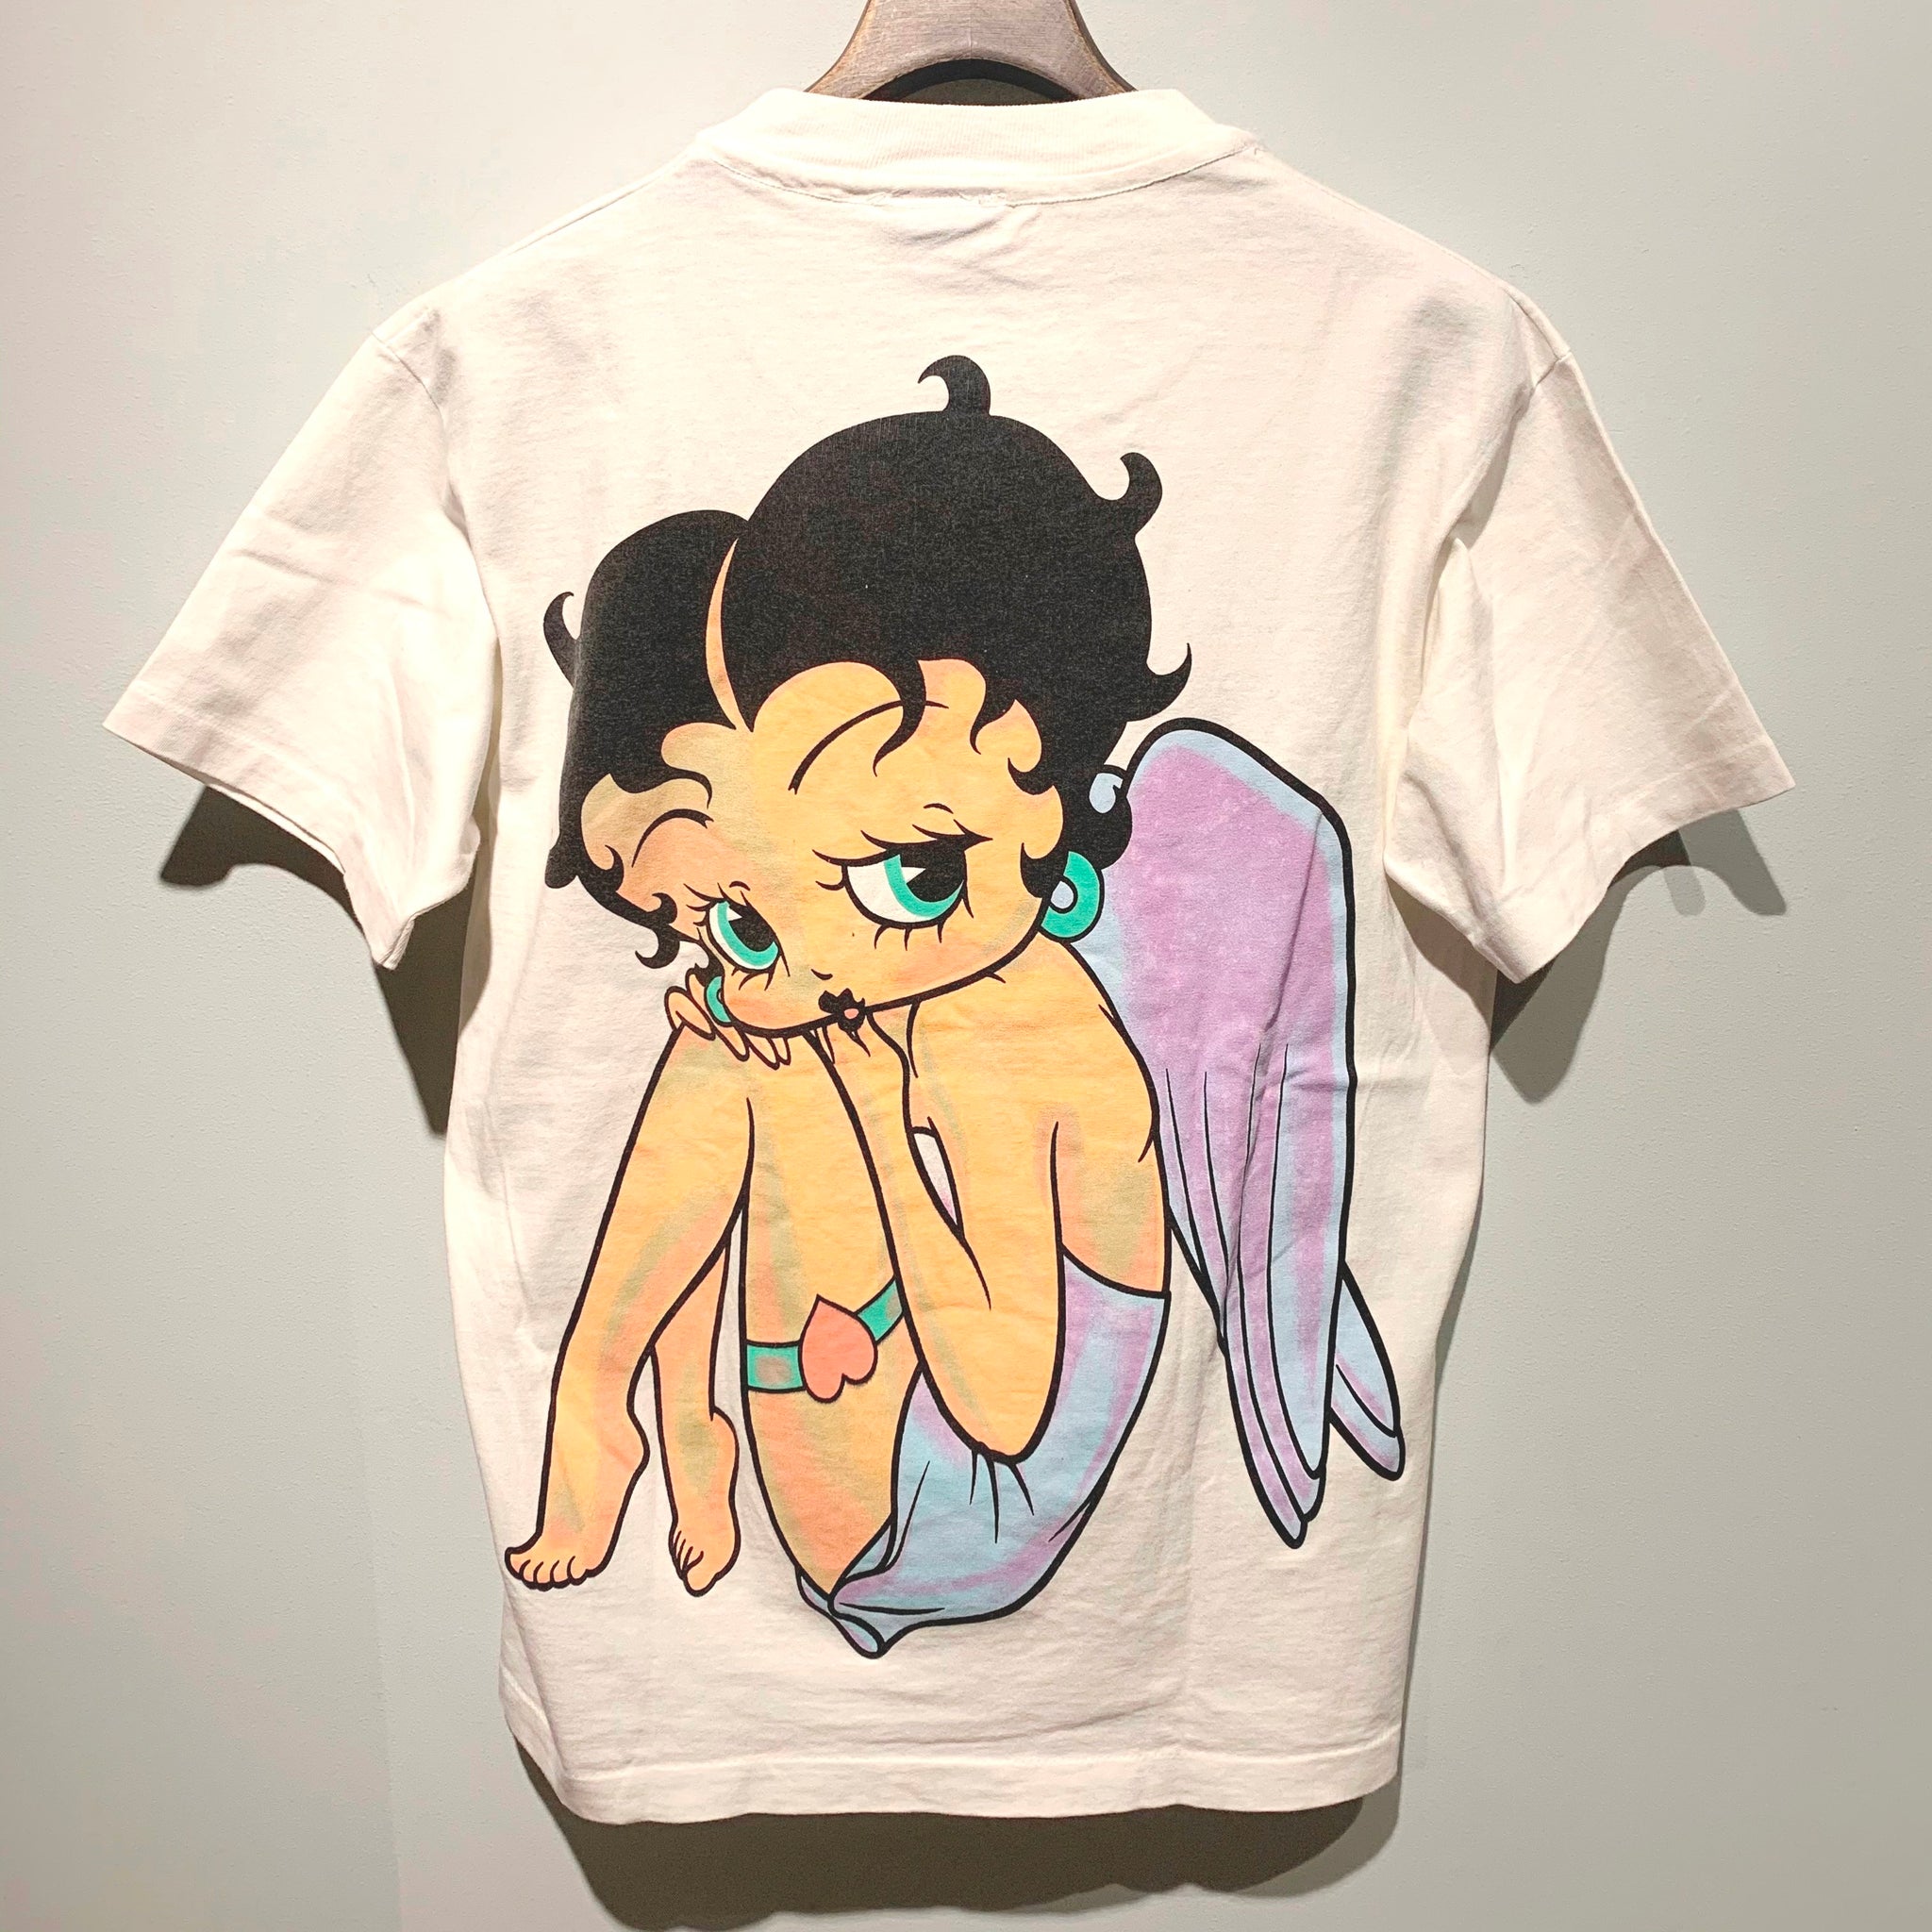 Betty Boop 90s USA製 tシャツ changes | www.esn-ub.org